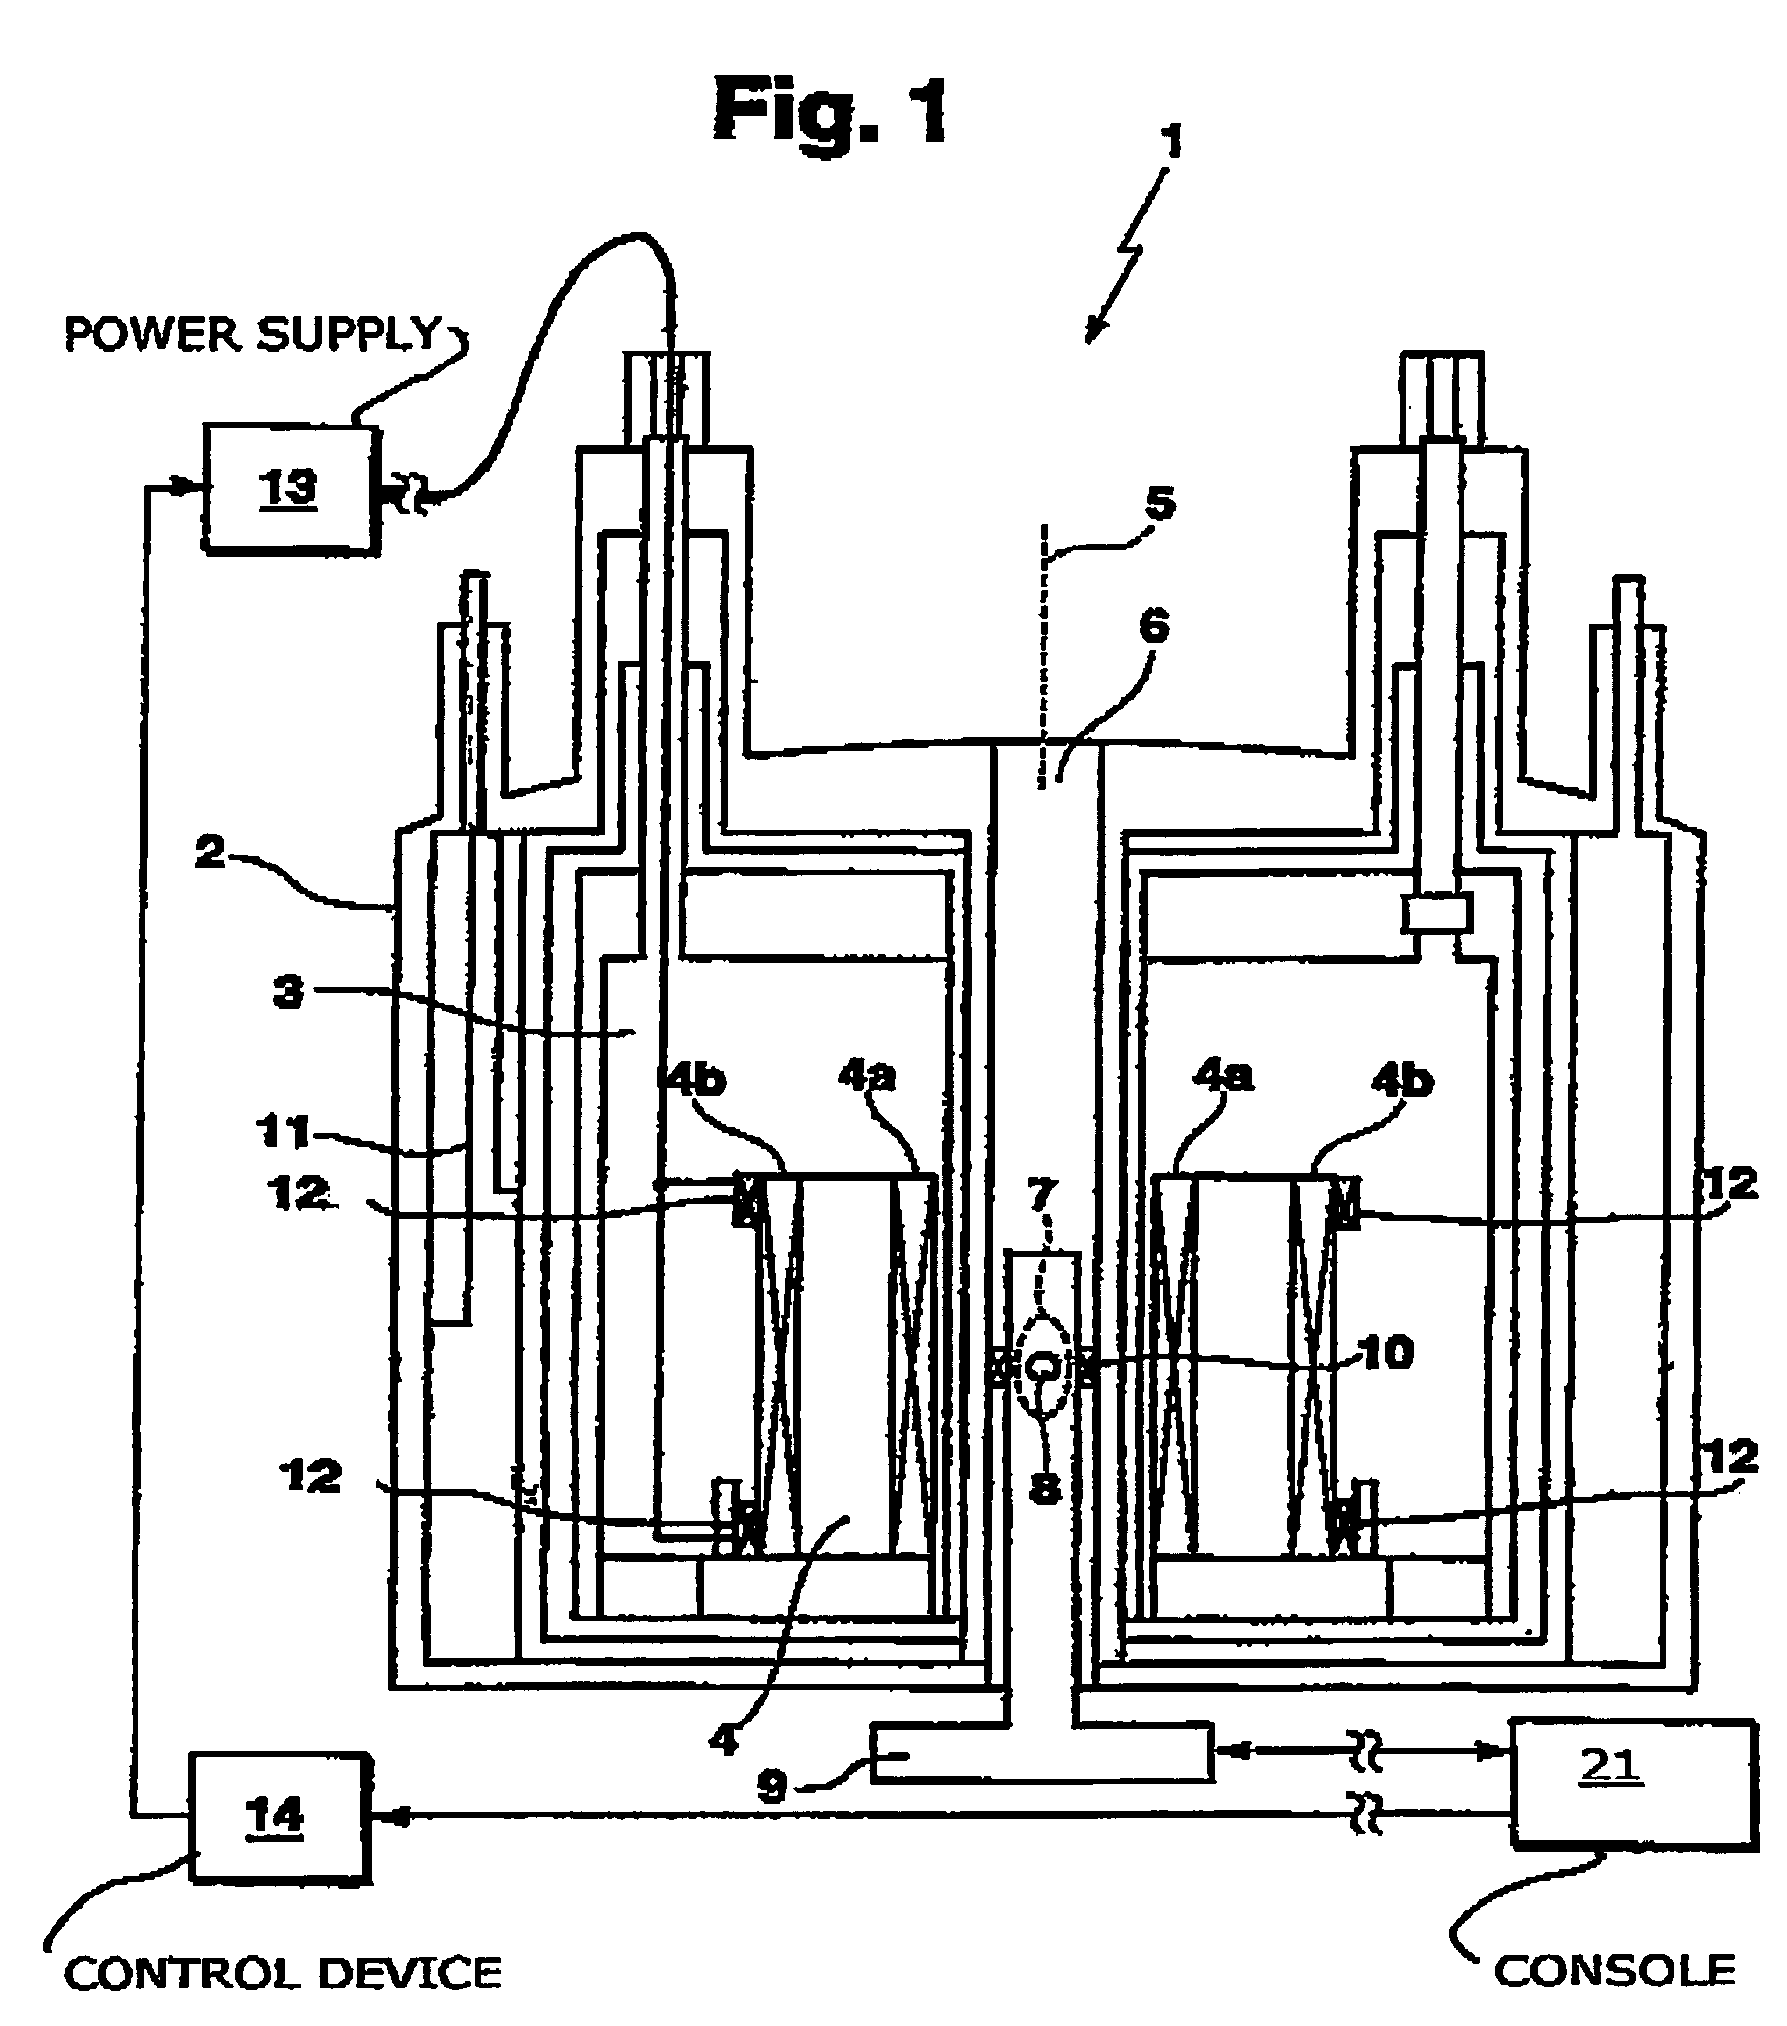 Superconducting magnet system with drift compensation